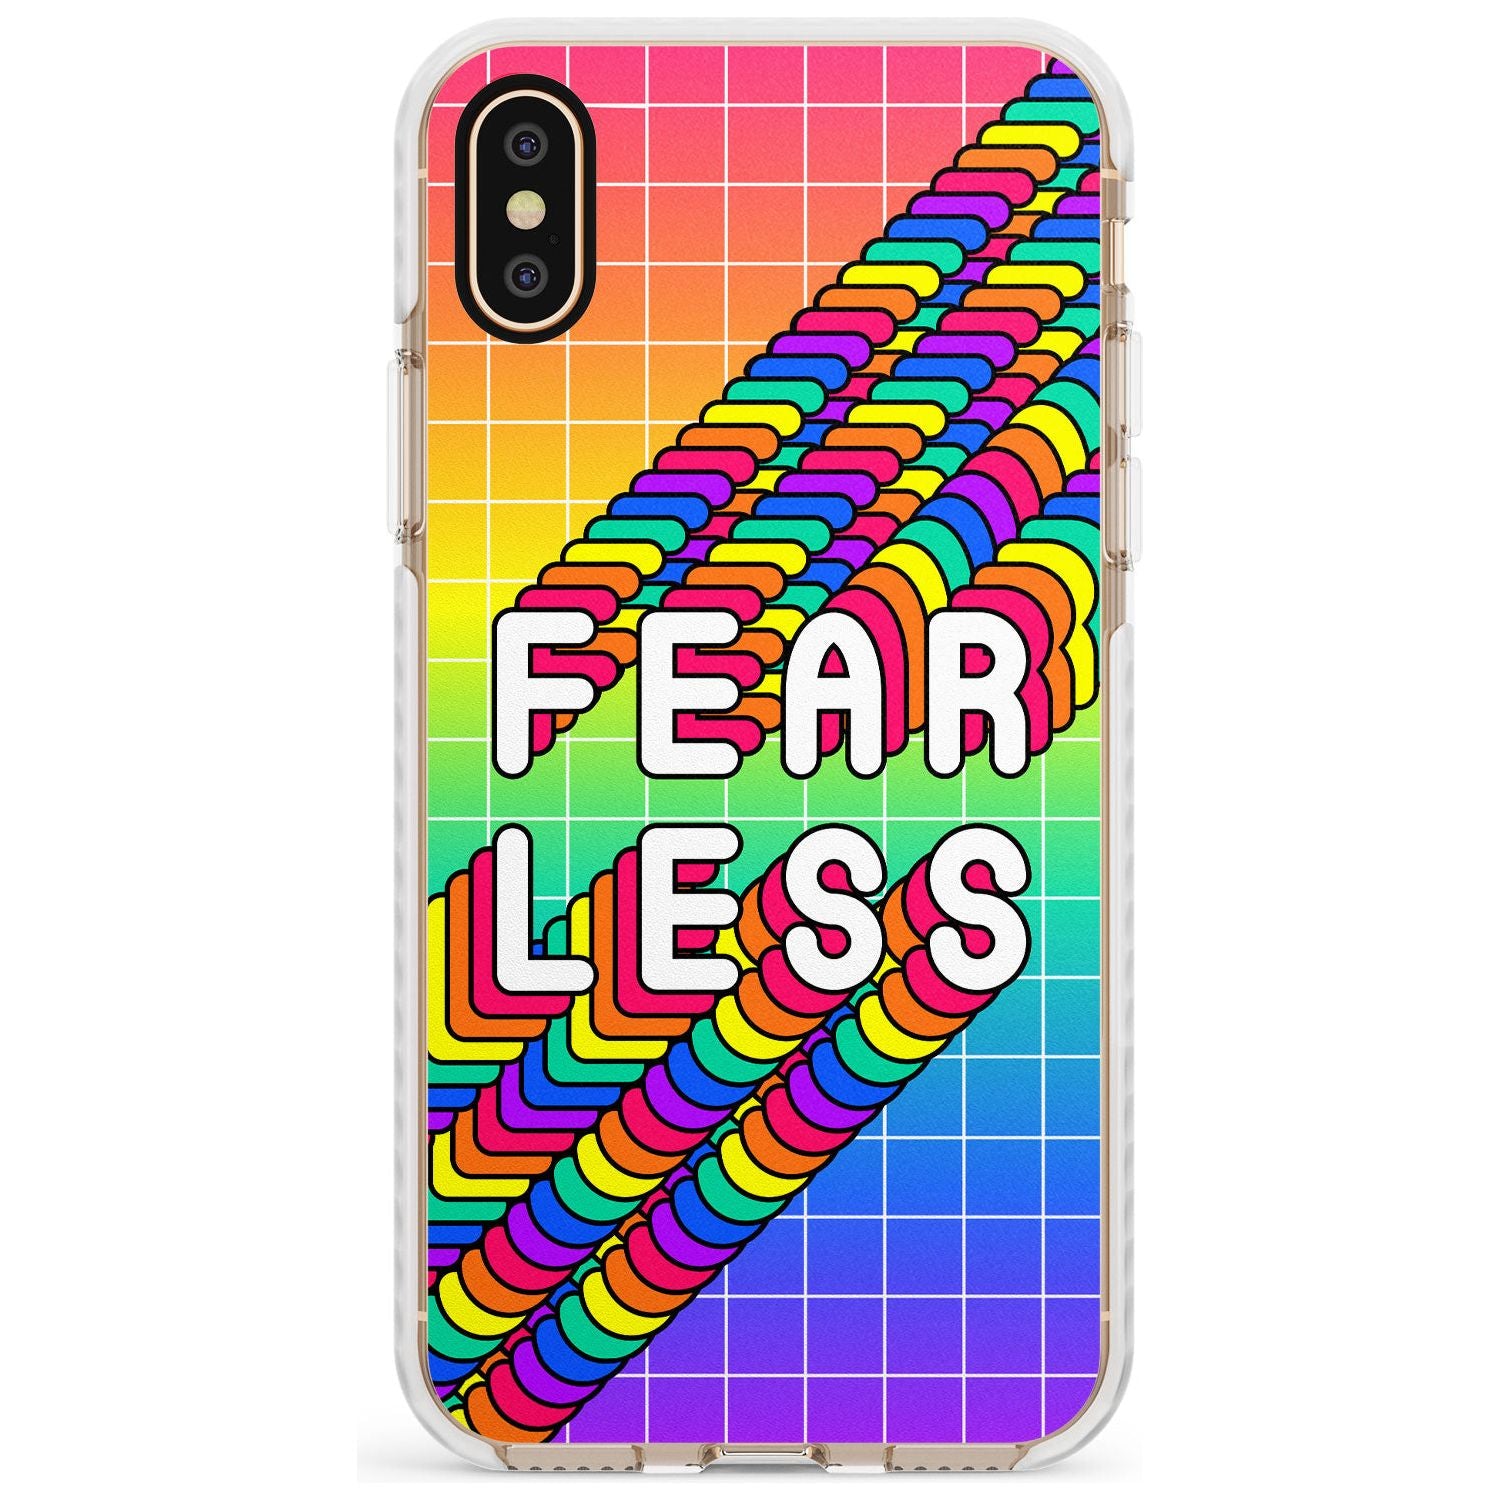 Fearless Impact Phone Case for iPhone X XS Max XR